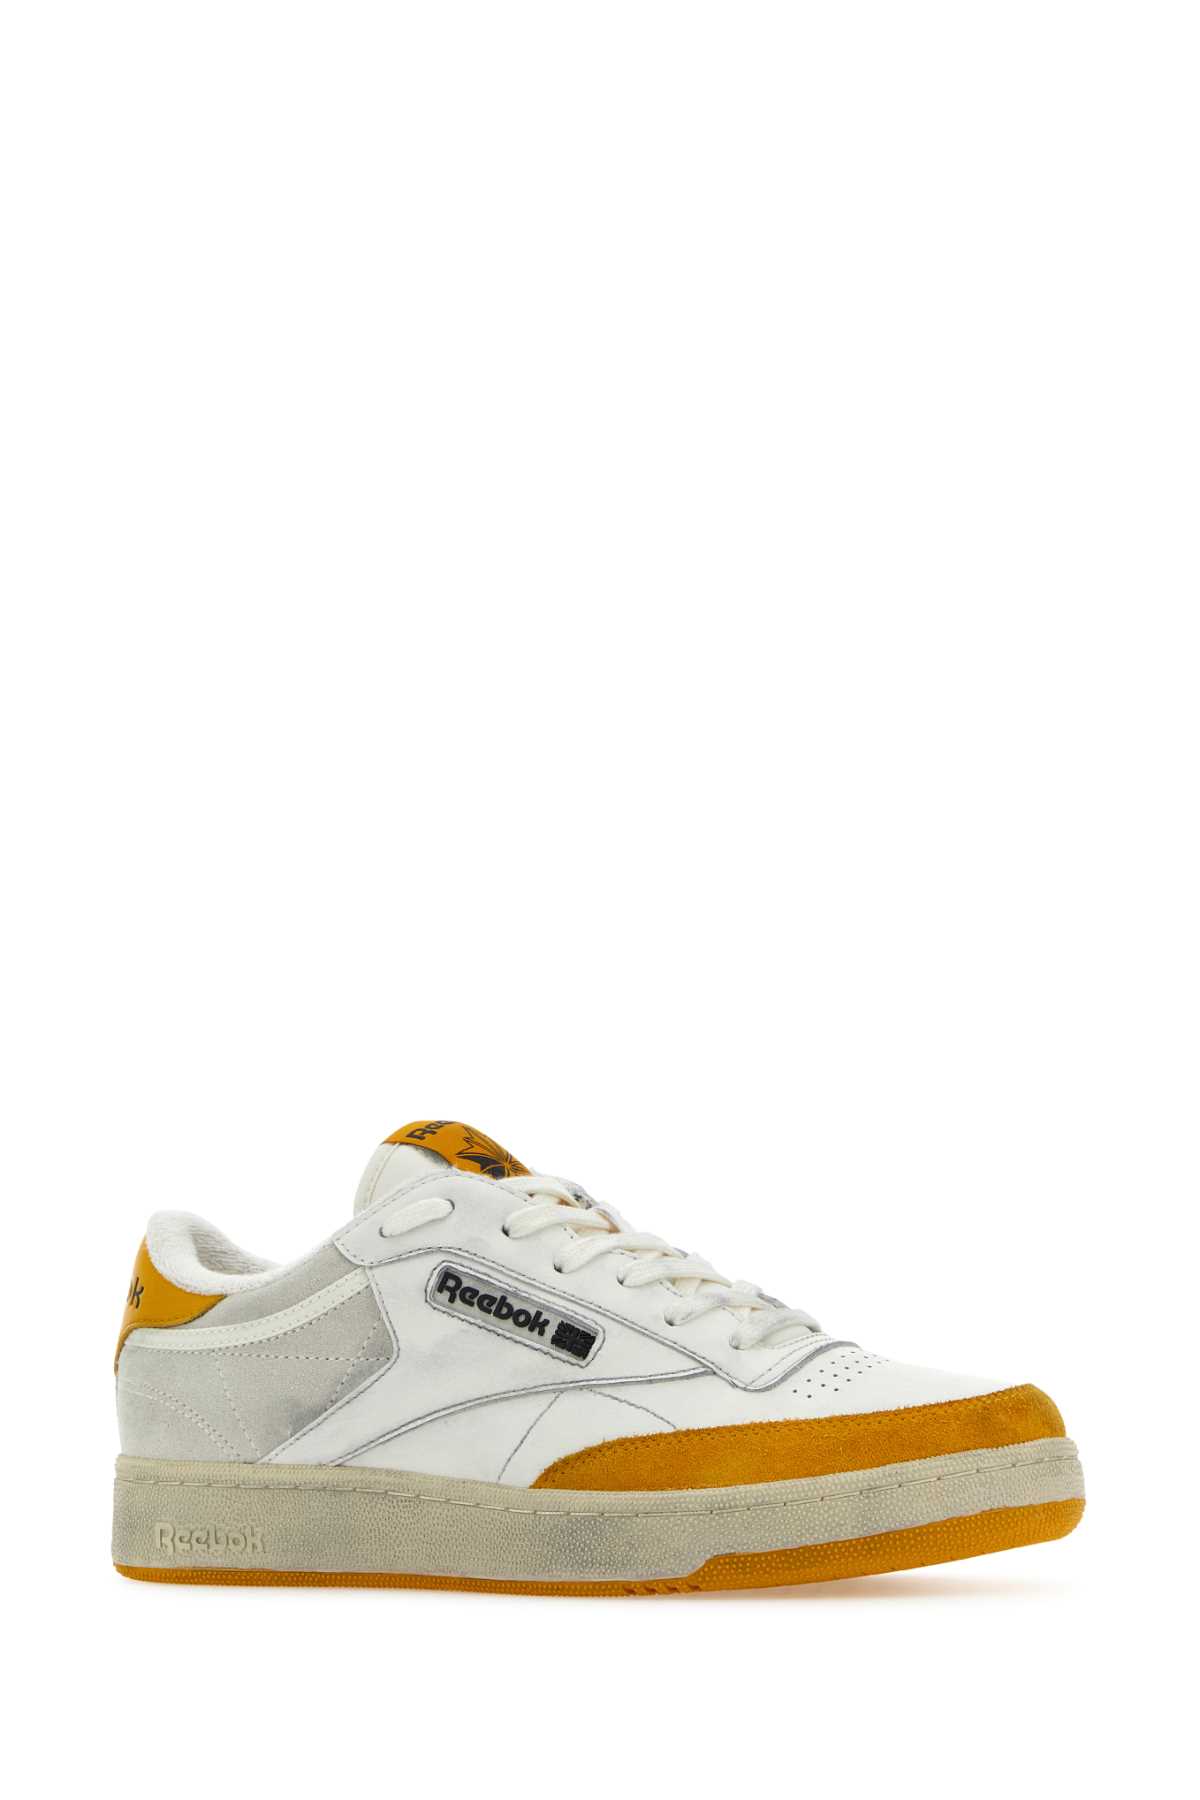 Reebok Two-tone Leather And Suede Club C Sneakers In Whiteoran